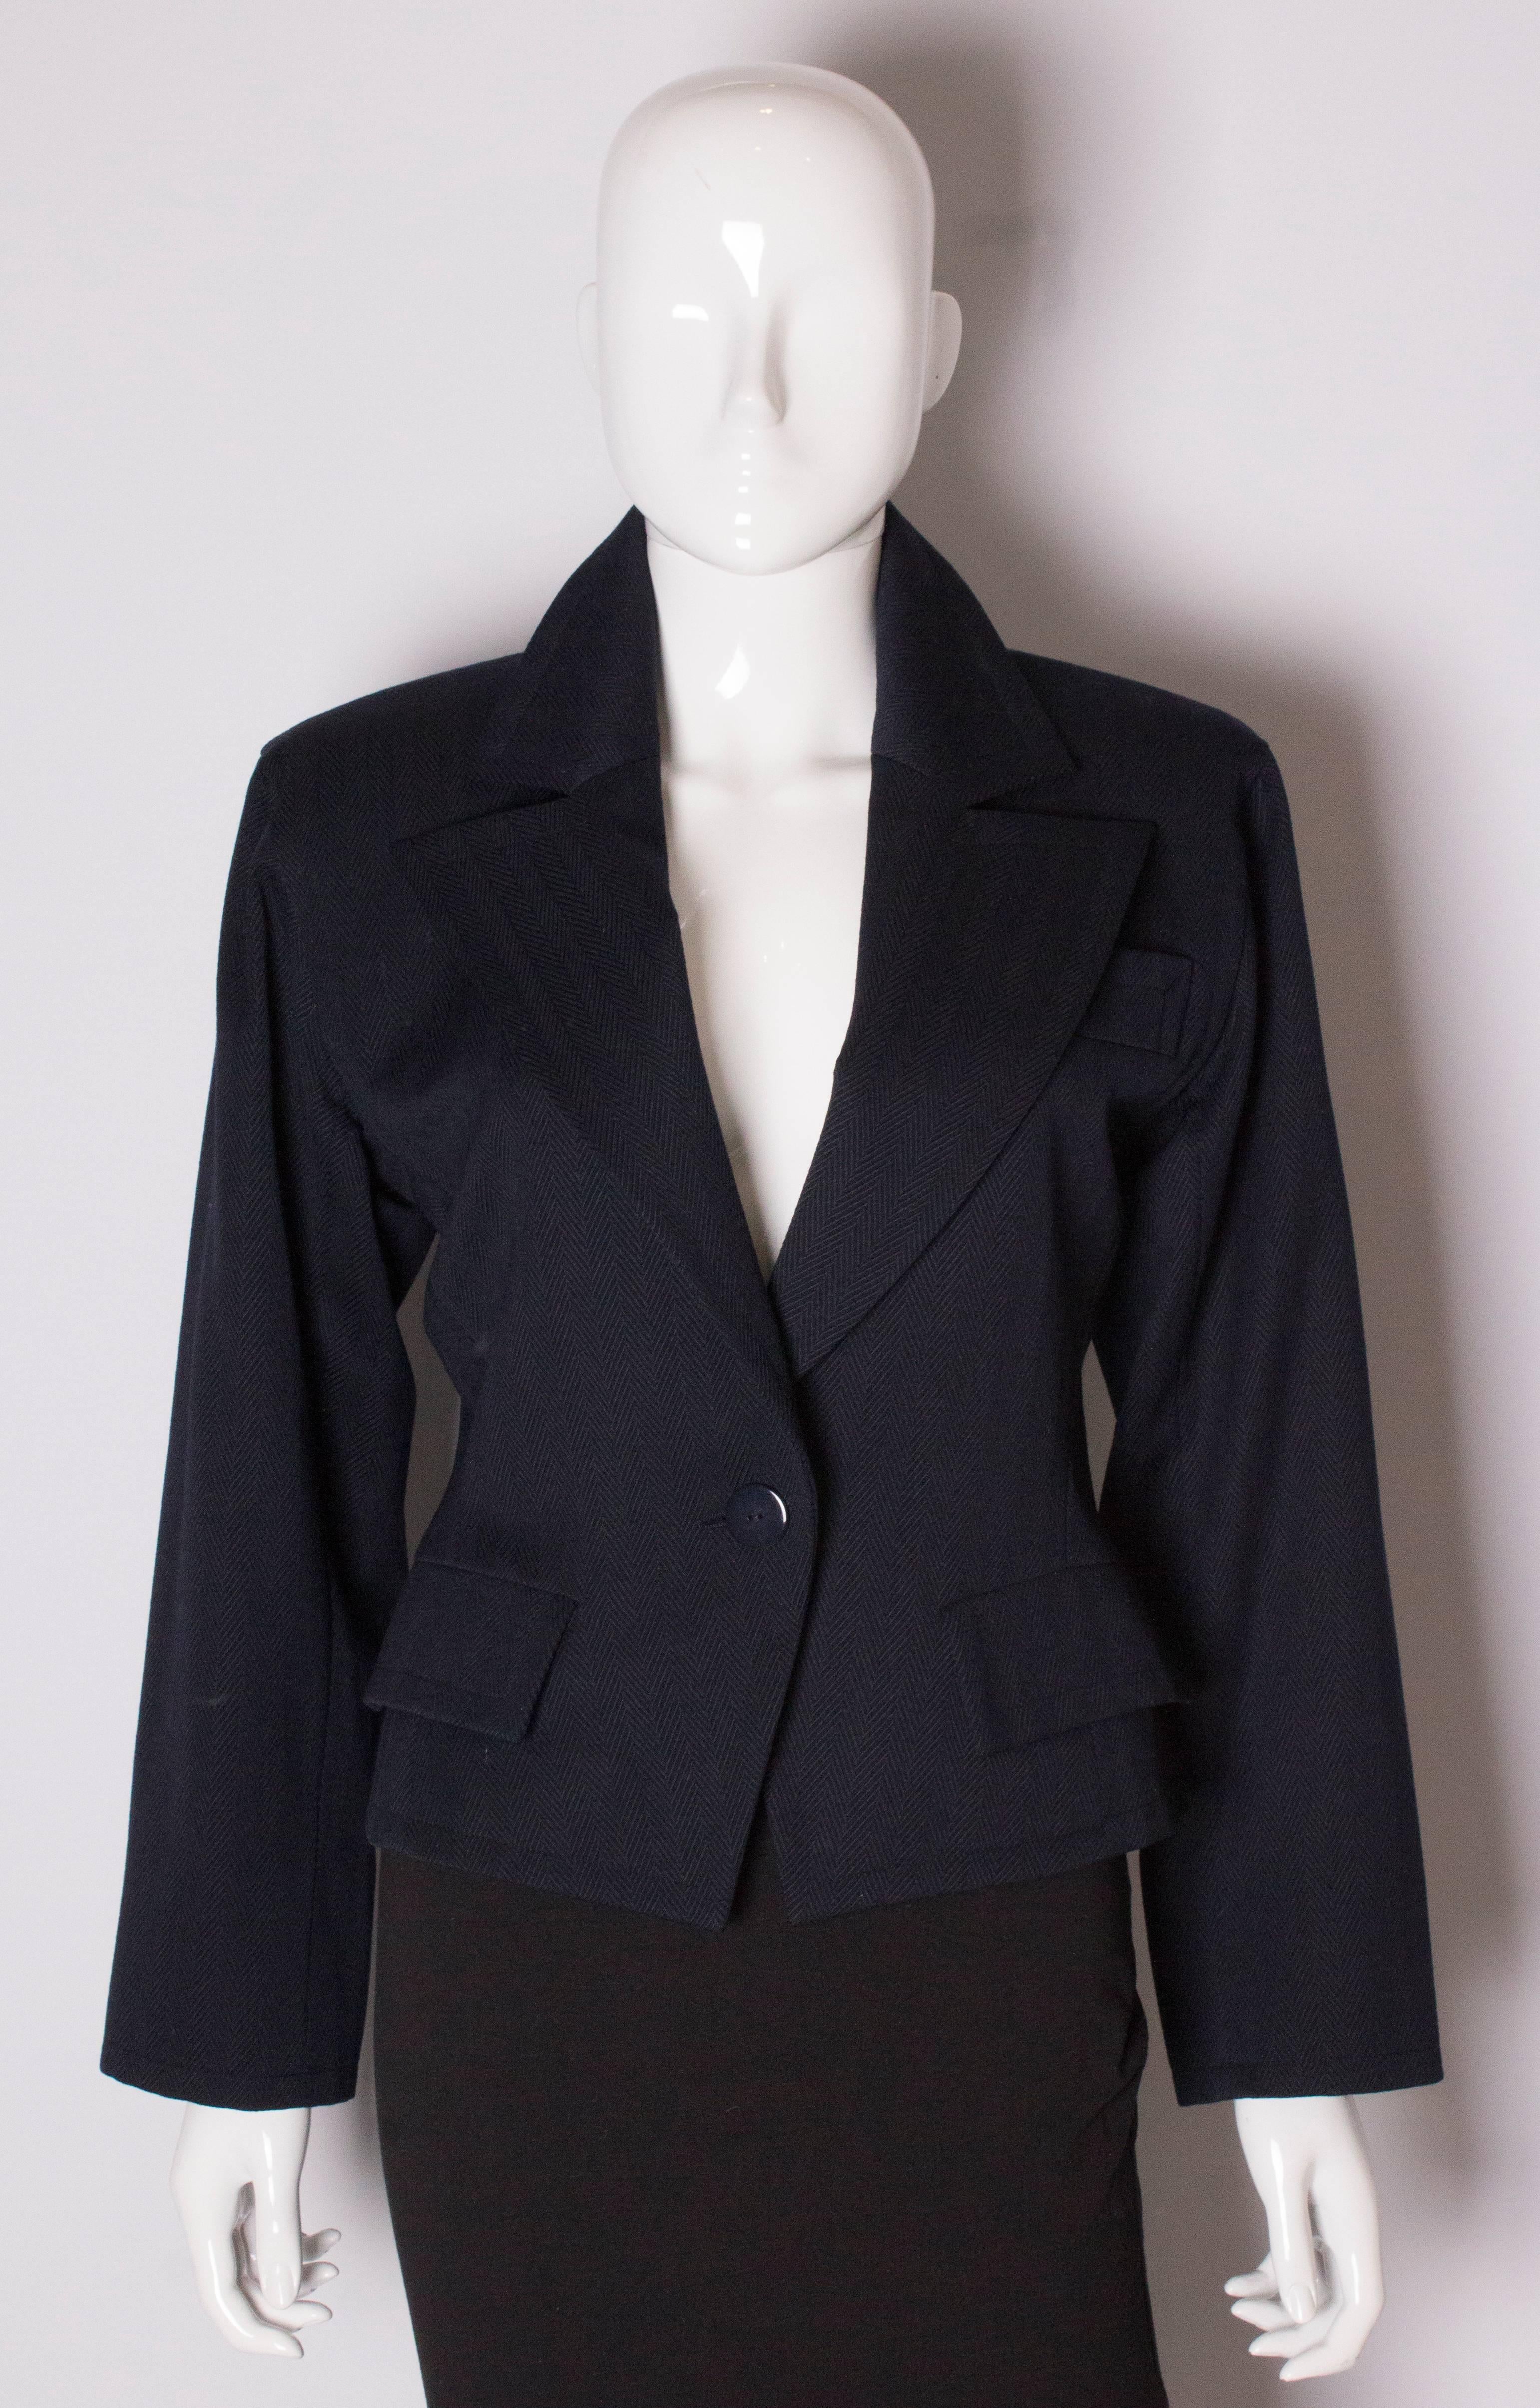 A chic jacket by Yves Saint Laurent  Variation line. The jacket is in a dark blue  herring bone like fabric and has one breast pocket and two smaller pockets at hip leval. It has one central button fastening and one button on each cuff.
Bust 36'',